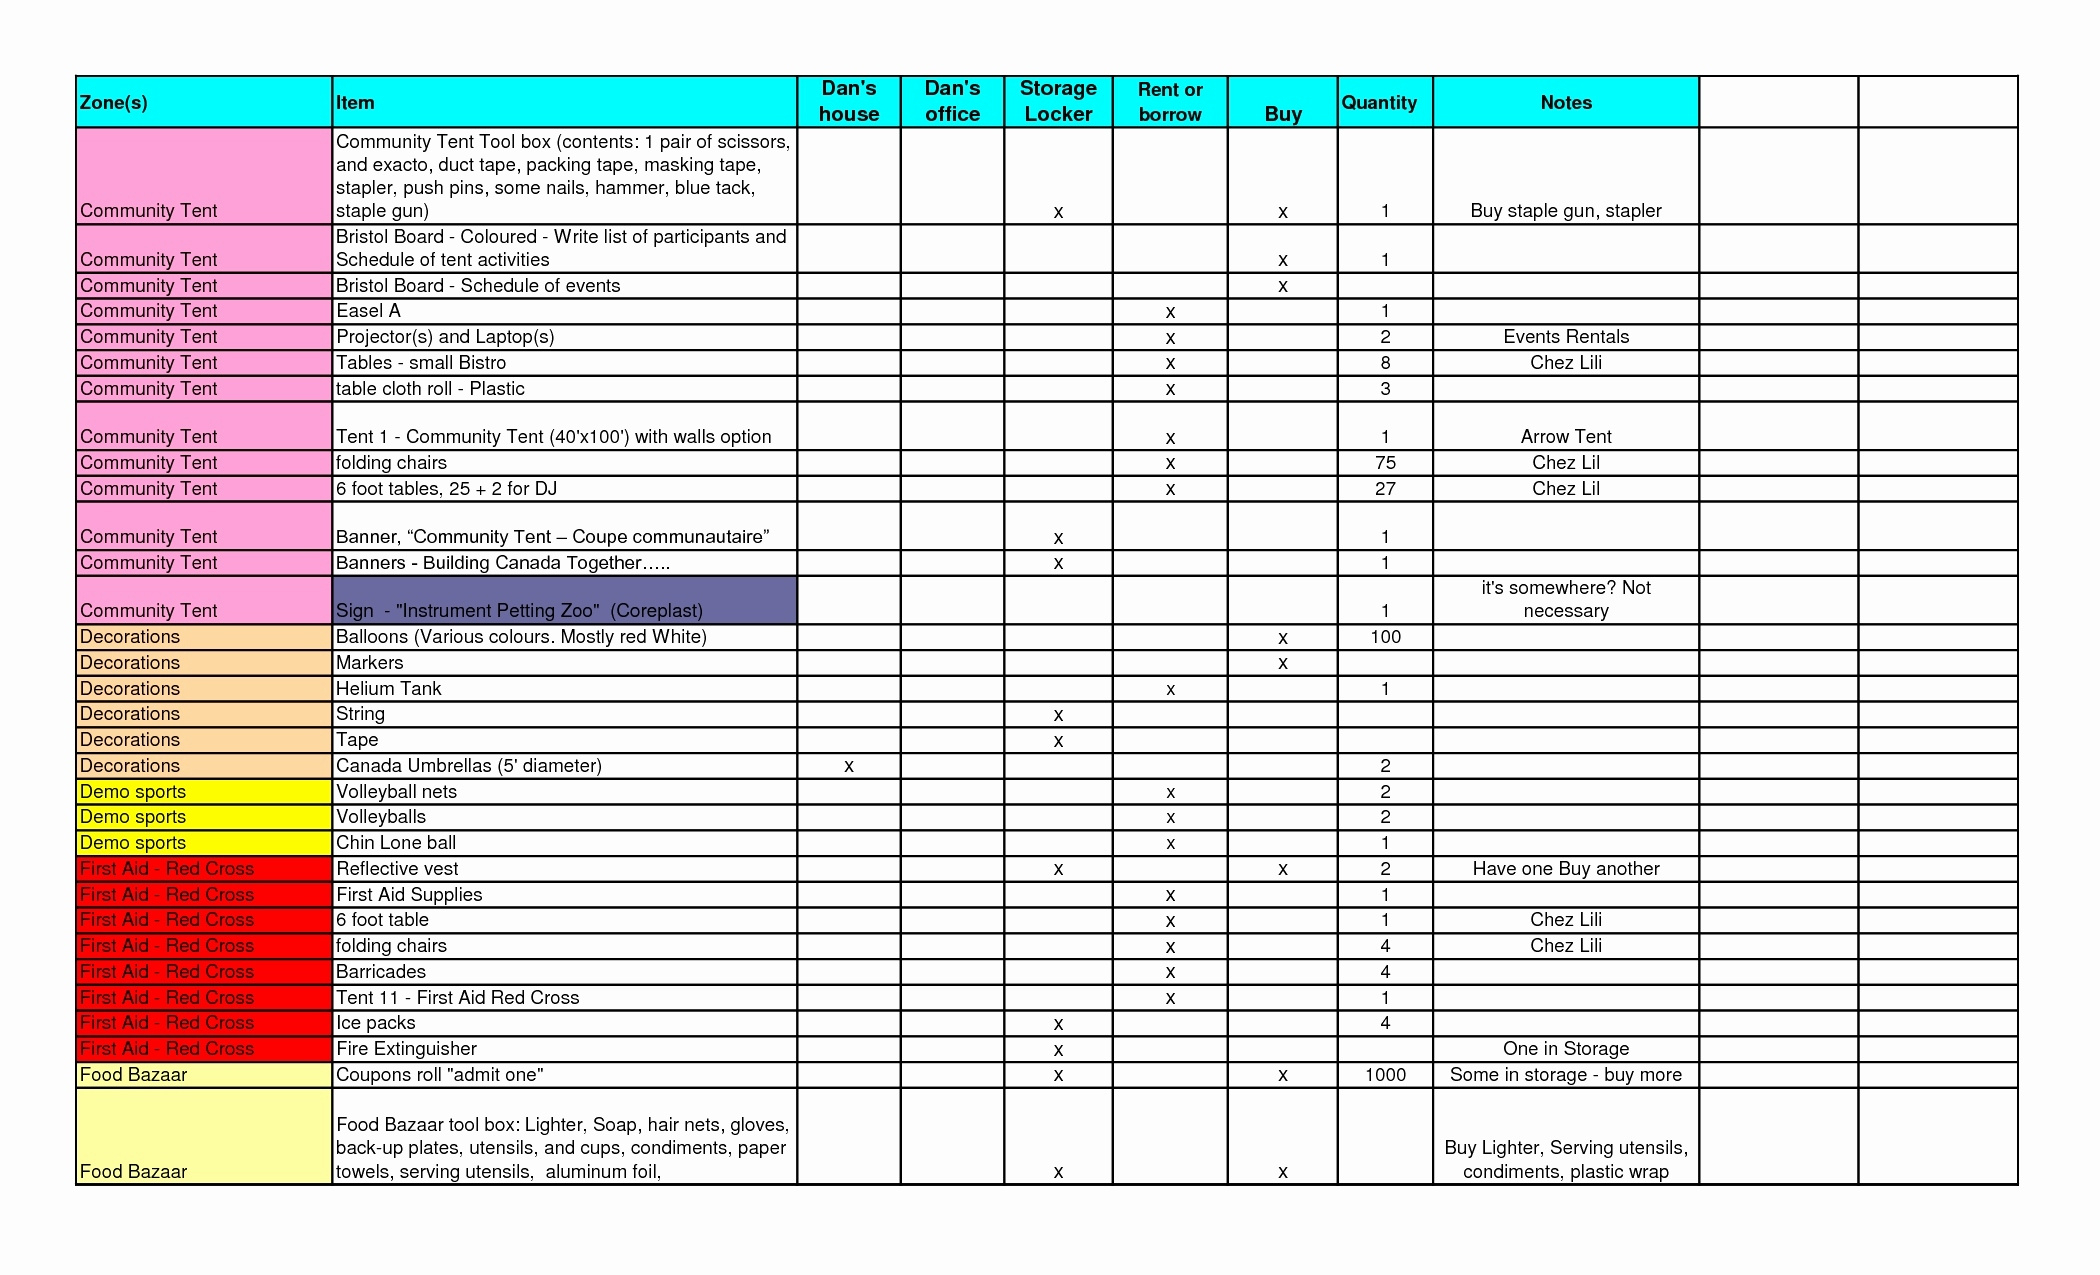 Food Cost Spreadsheet Awesome Food Cost Inventory Spreadsheet Free In Food Cost Inventory Spreadsheet